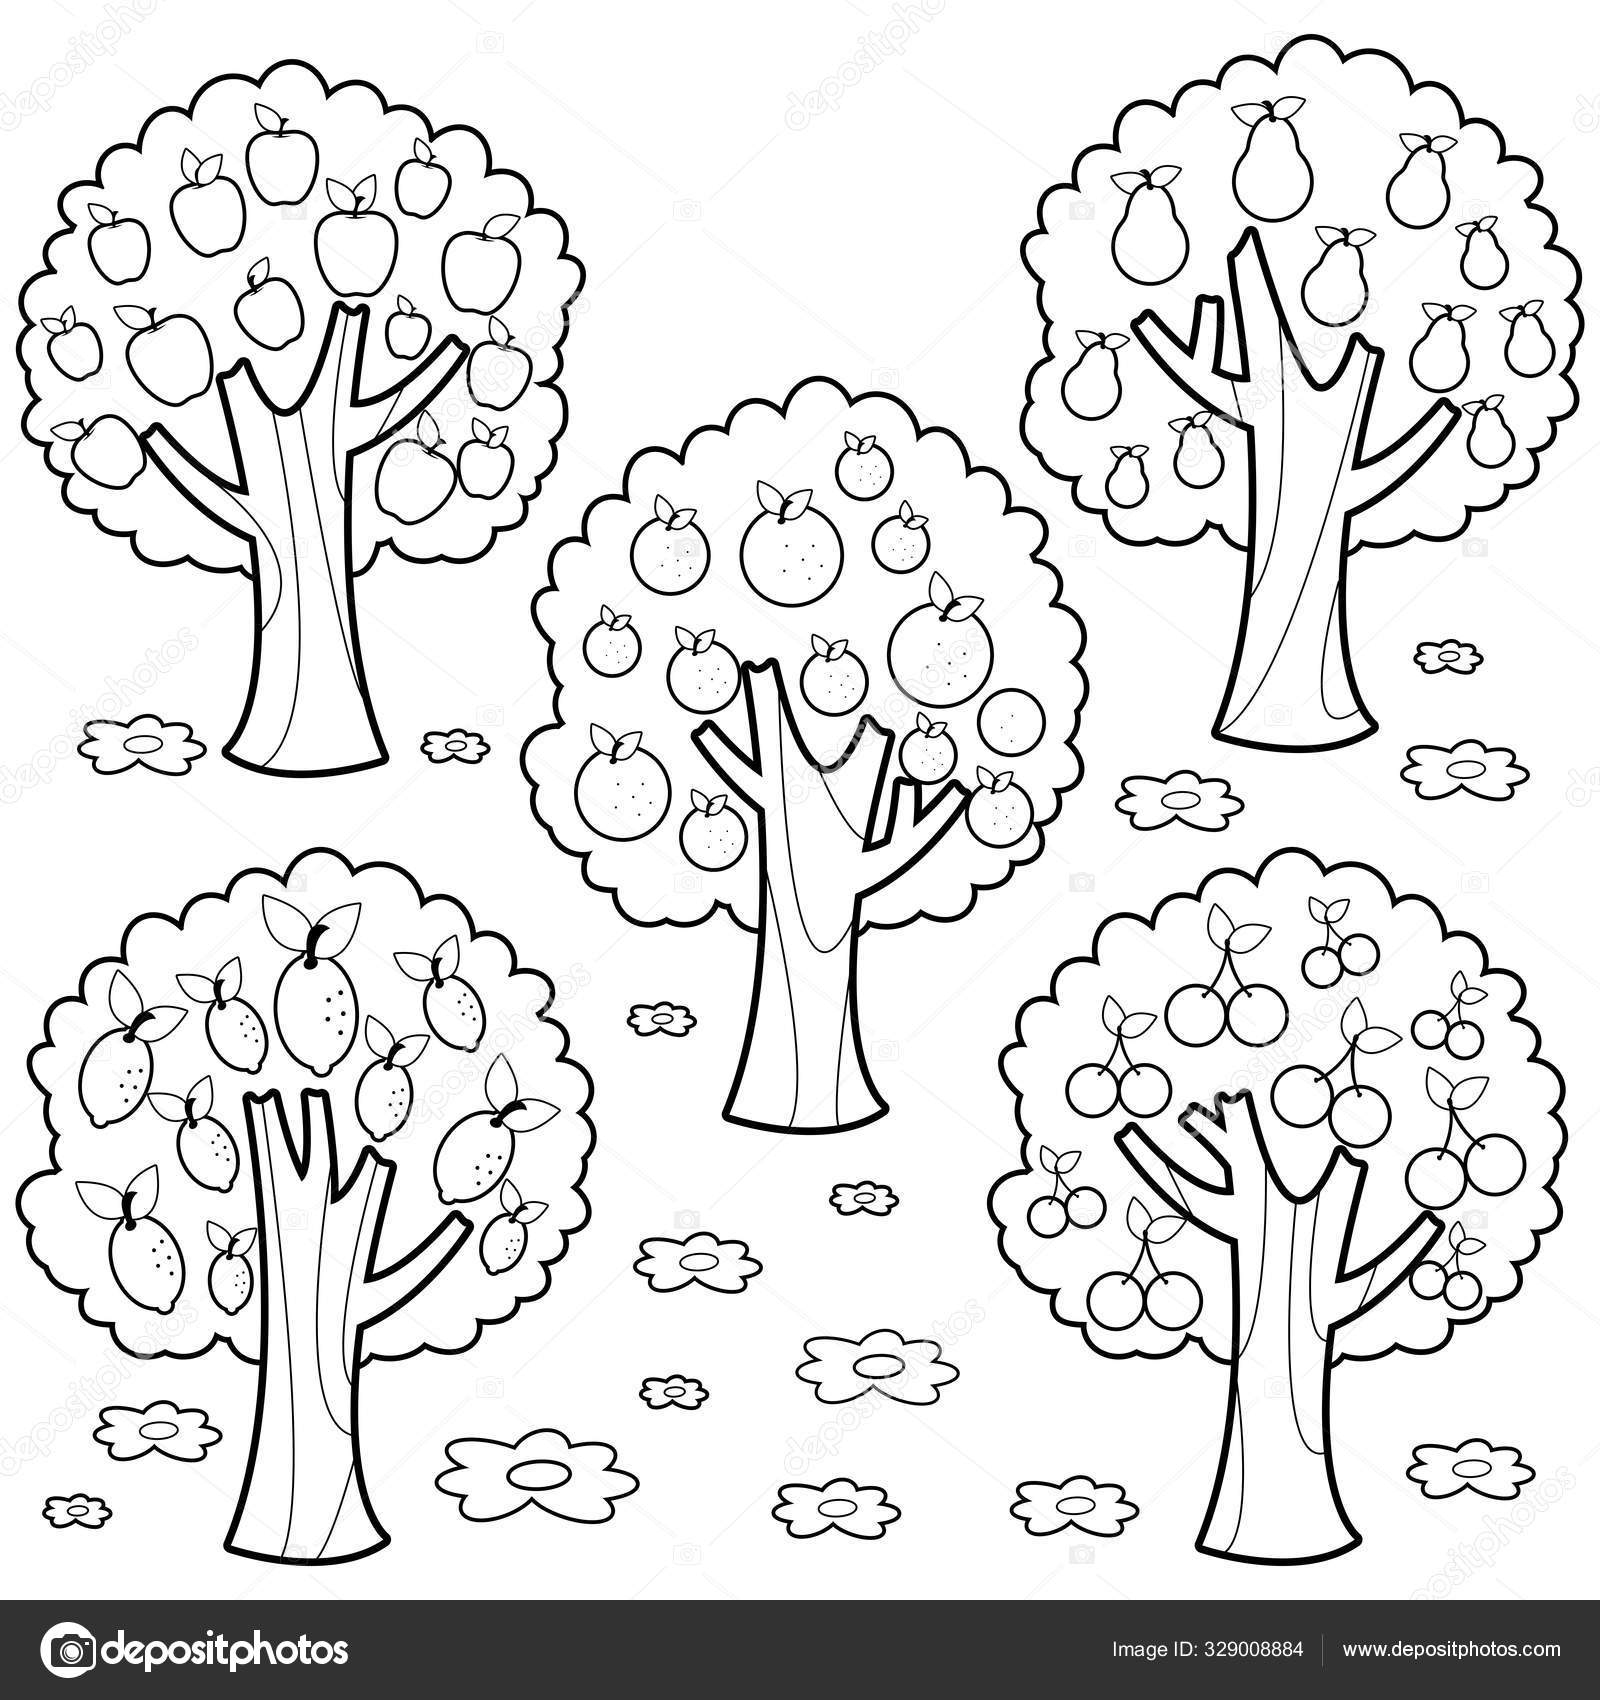 Orange Tree Coloring Pages